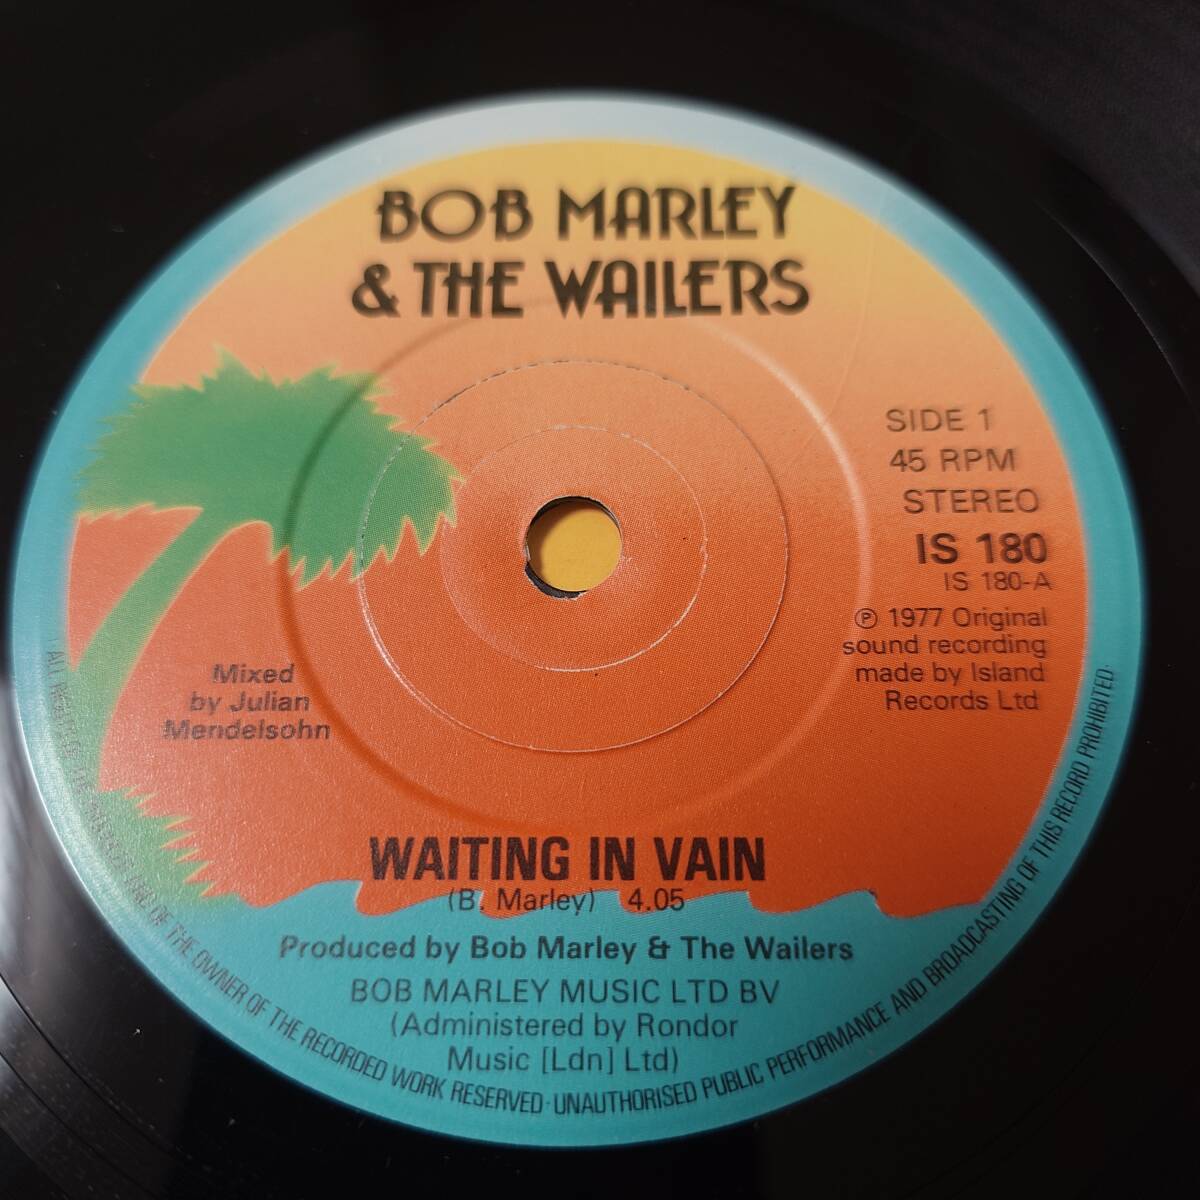 Bob Marley & The Wailers - Waiting In Vain / Blackman Redemption // Island Records 7inch / Rootsの画像3